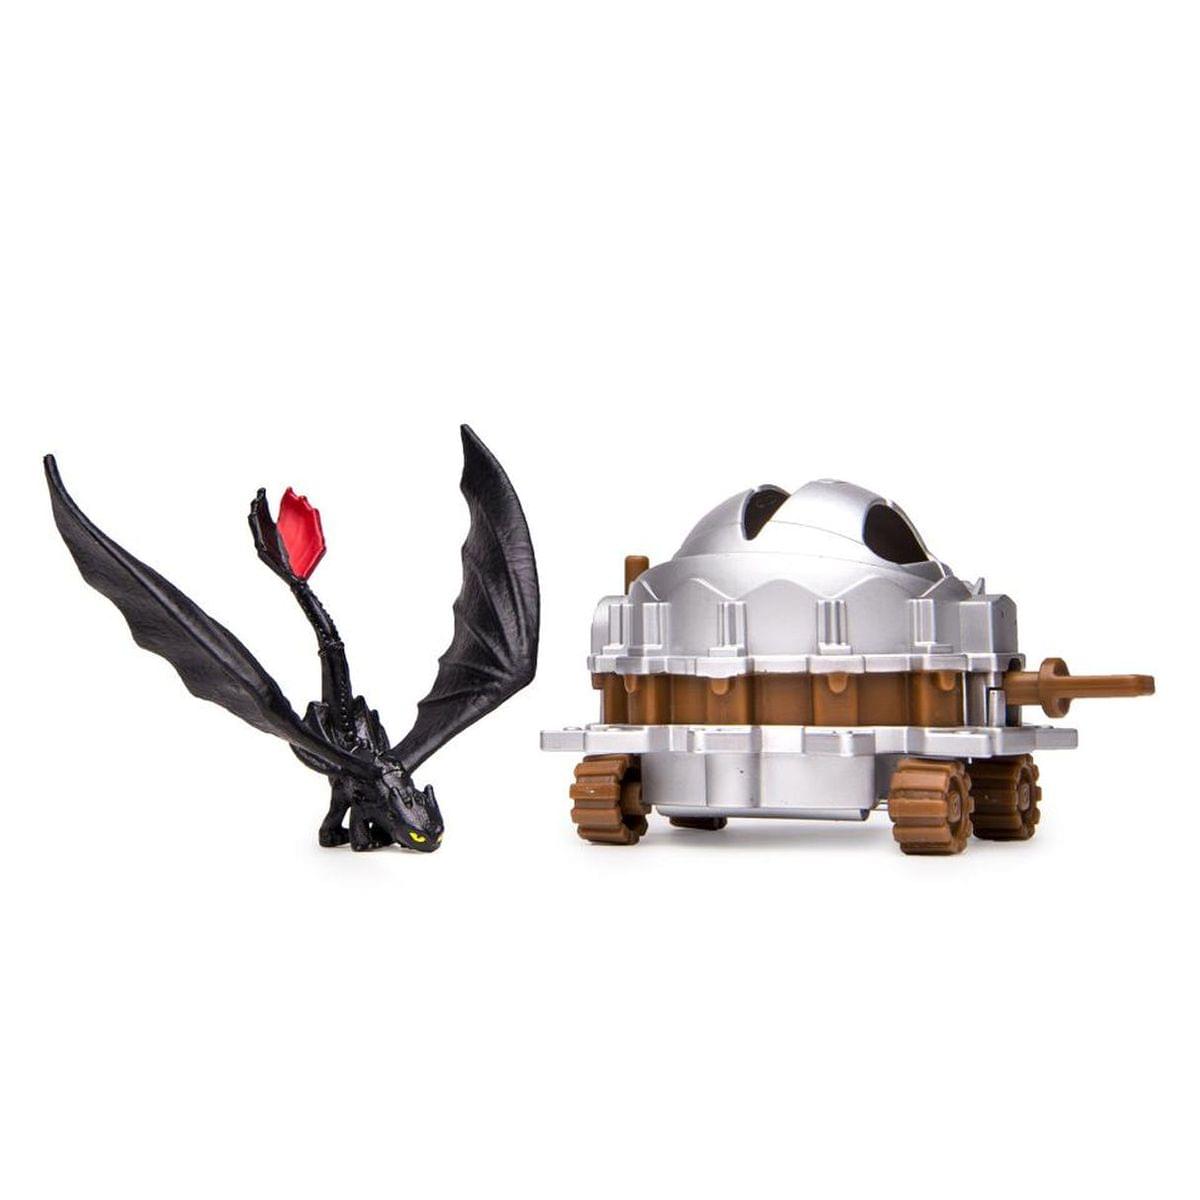 How To Train Your Dragon 2 Figure Battle Pack: Thoothless vs Dragon Catcher